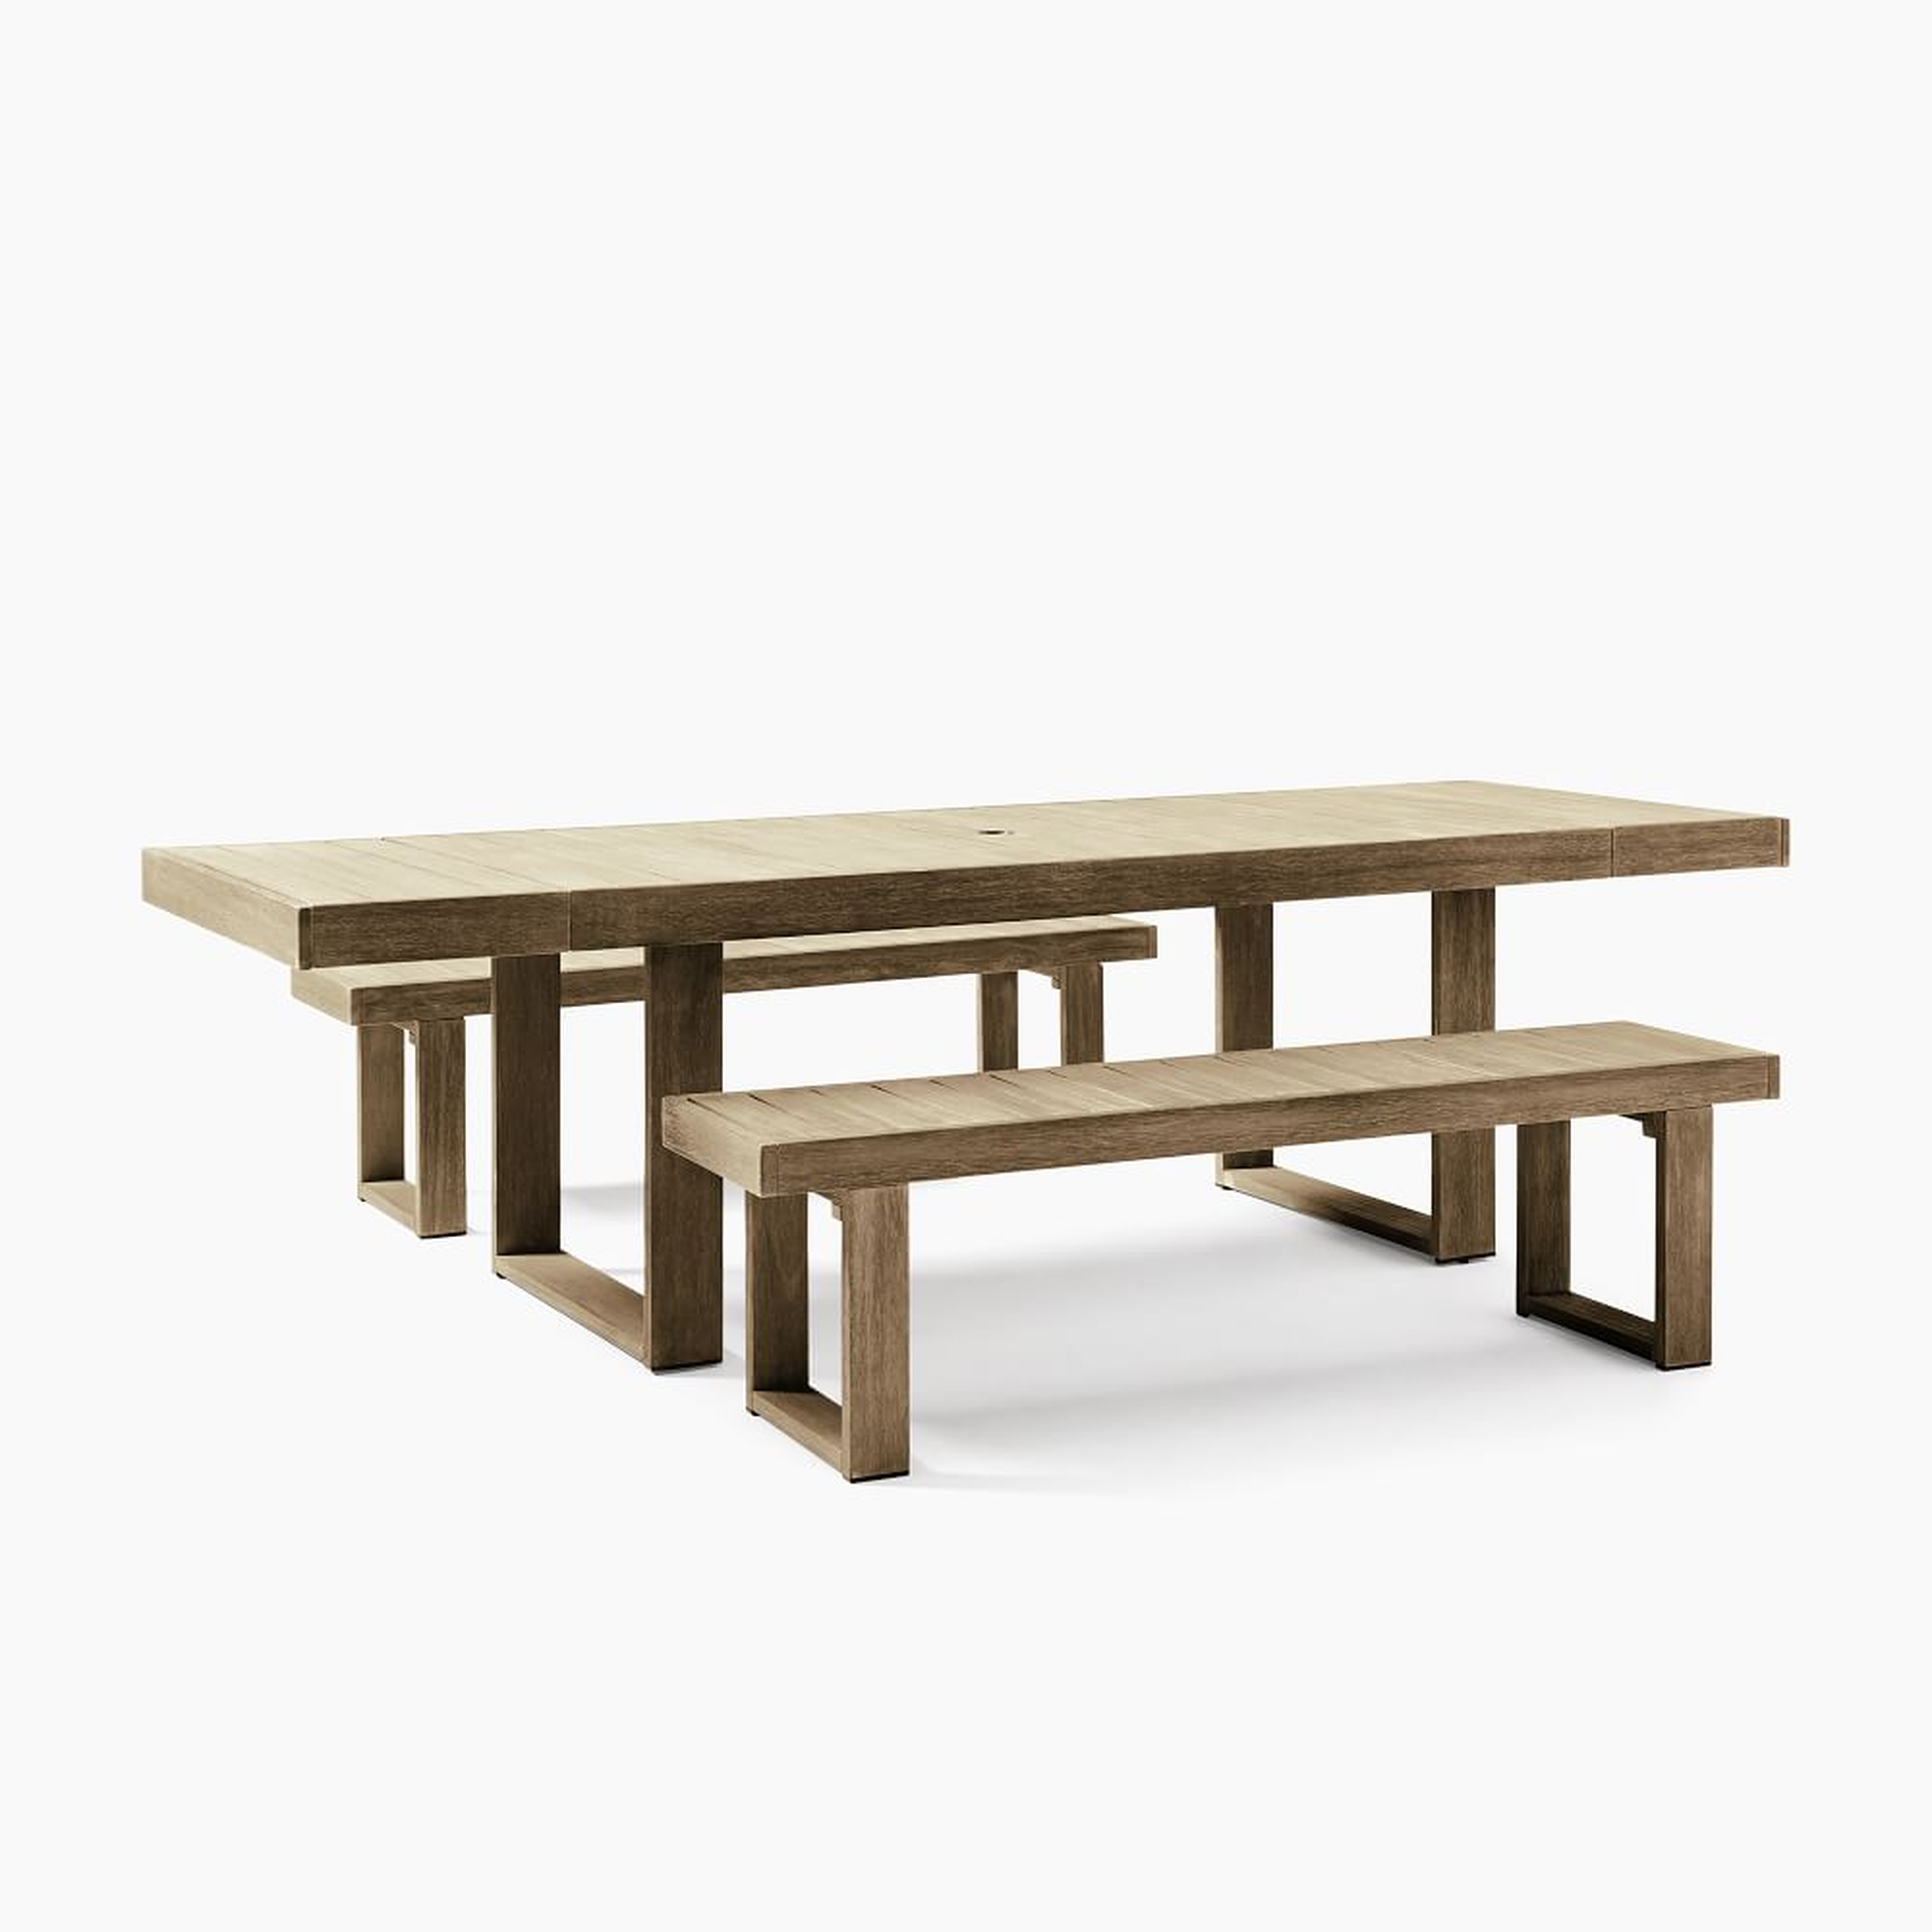 Portside Outdoor Expandable Dining Table + 2 66" Benches Set, Driftwood - West Elm